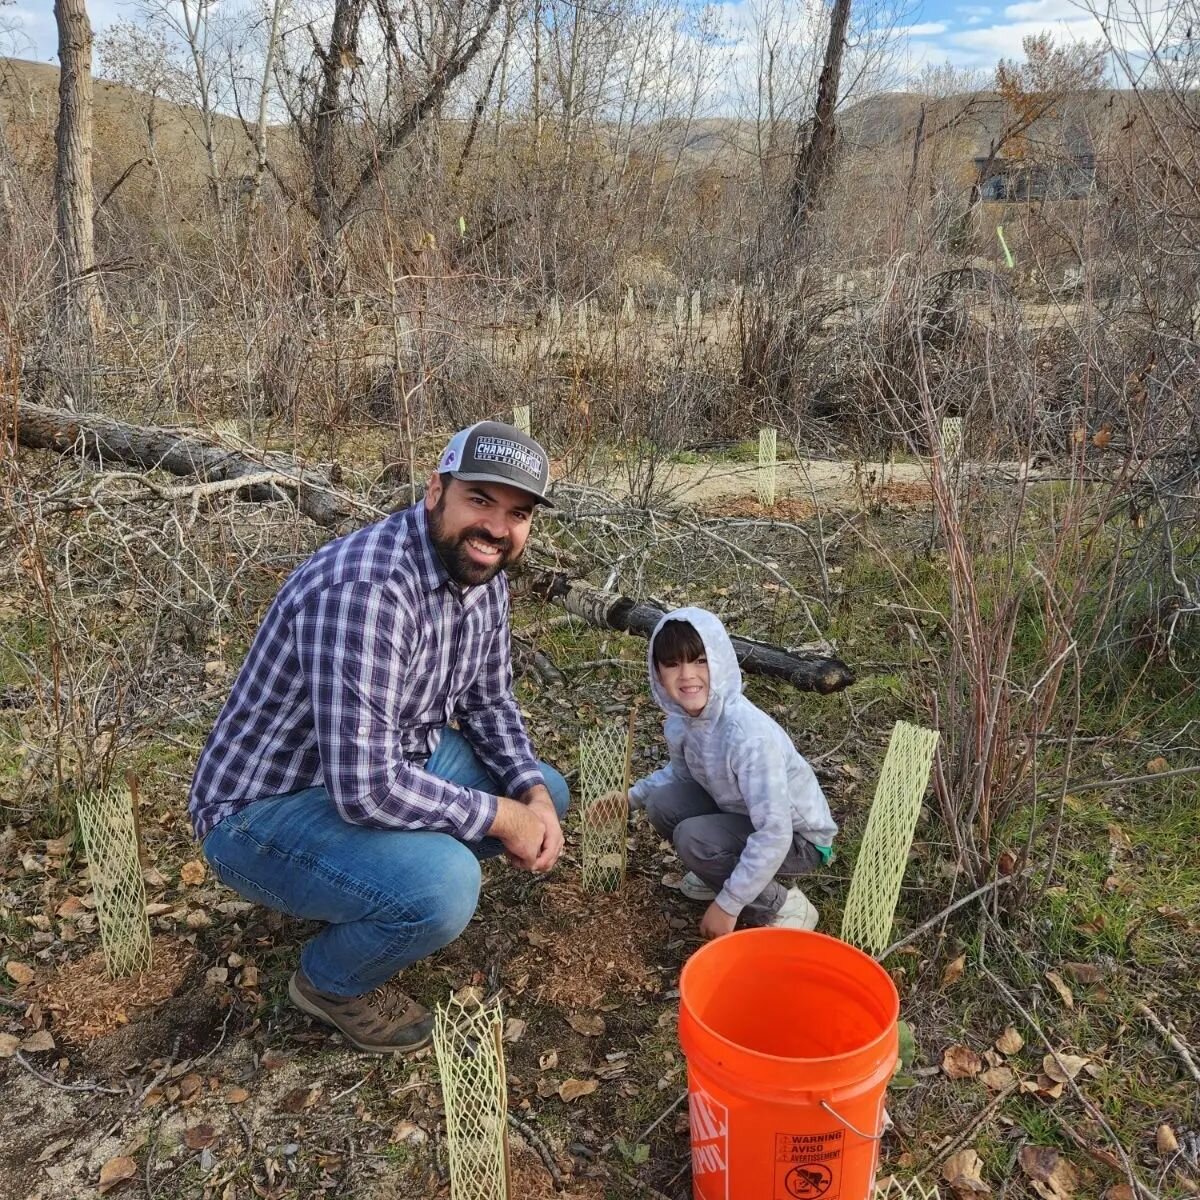 Our family was so excited to have the chance to help out at the Boise River Rewild site in Southeast Boise today. We've enjoyed being in and around the Barber Pool Conservation Area for many years but it's been exciting to see all the care being put 